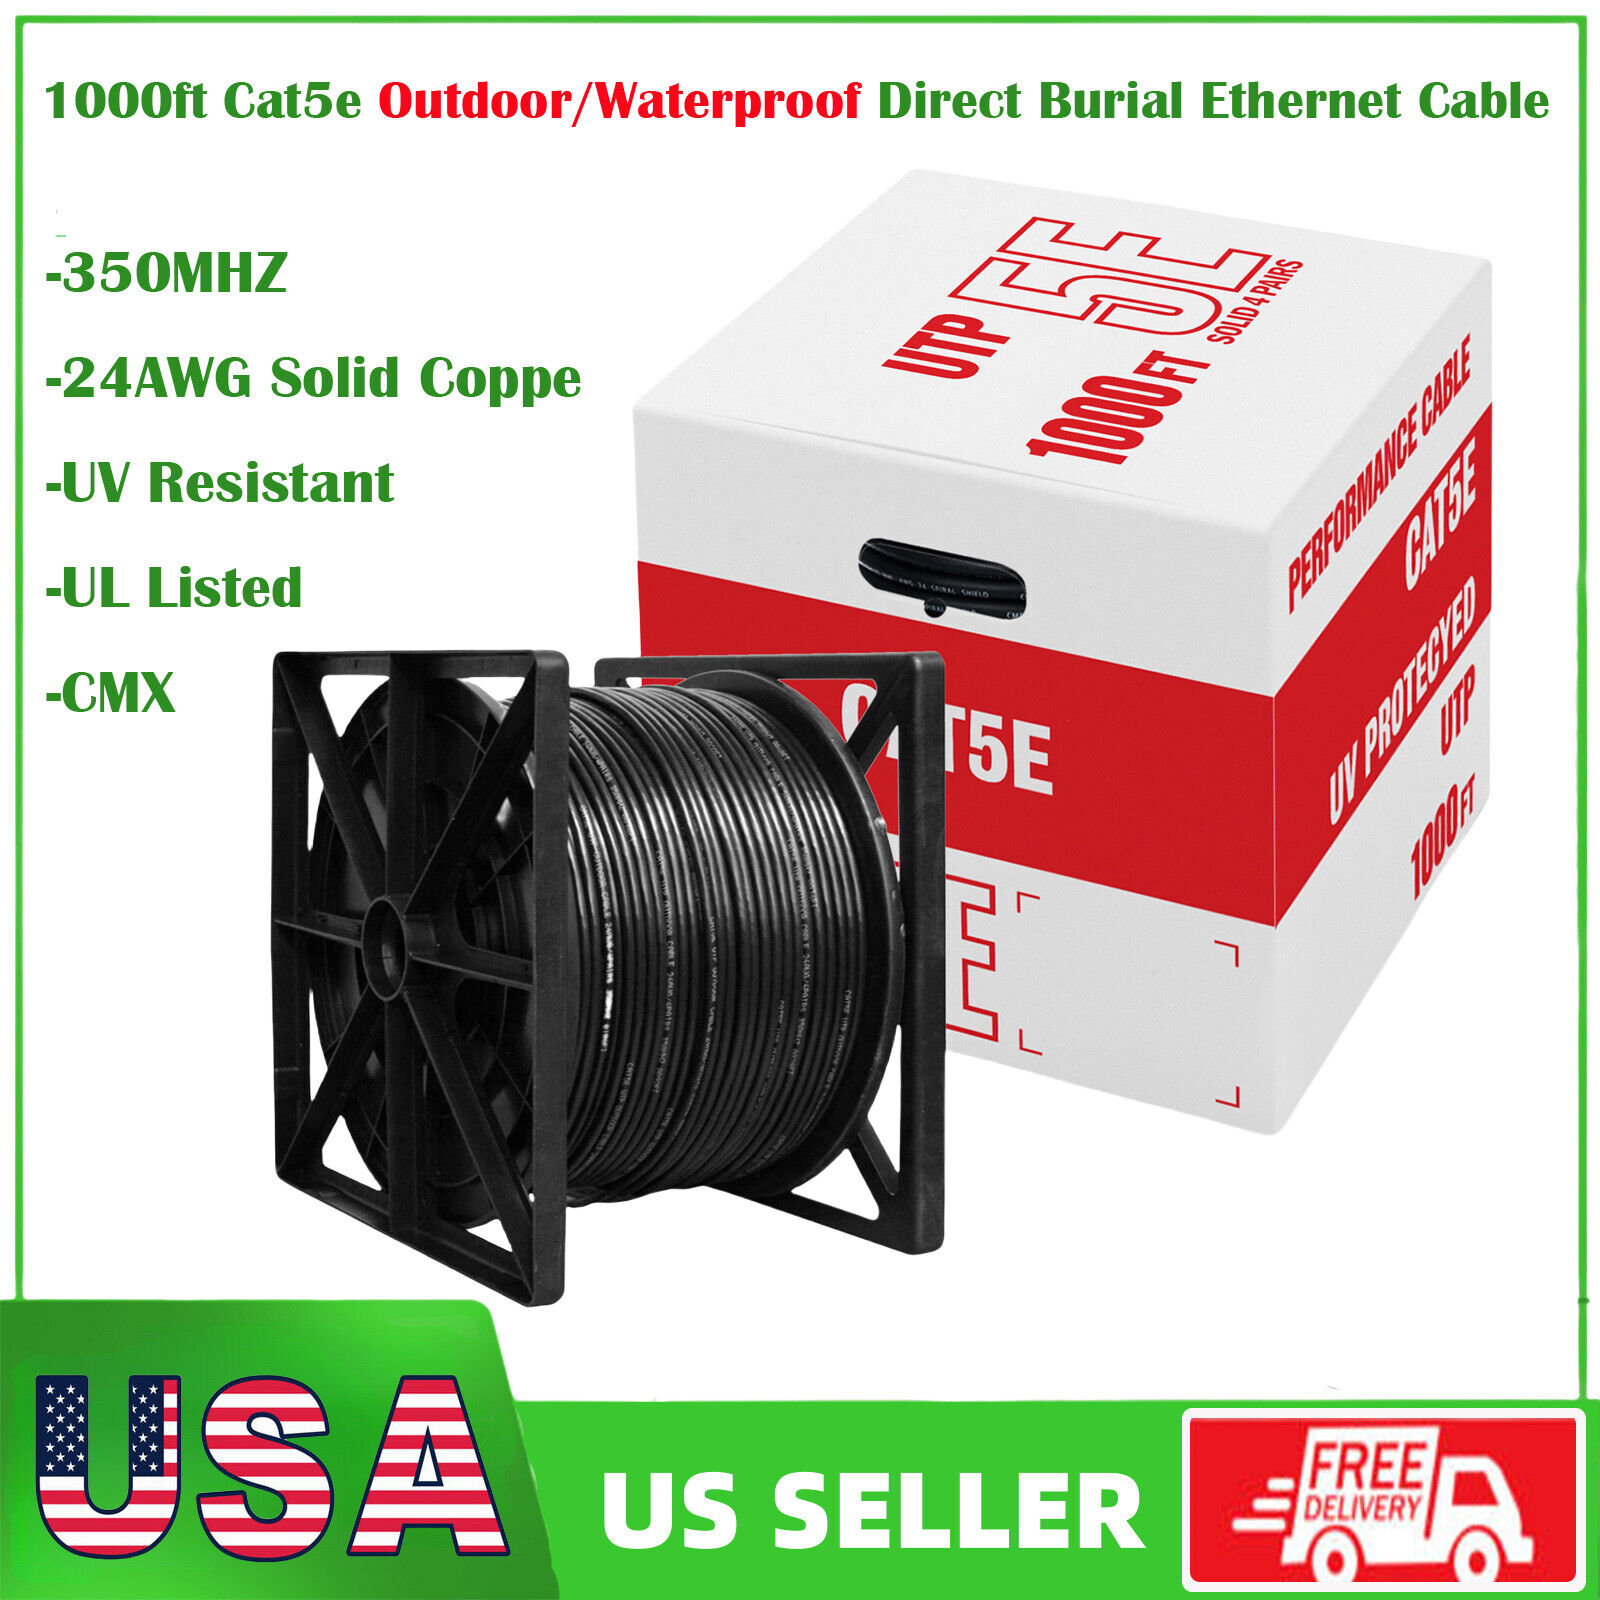 1000ft Cat6/Cat5e Outdoor Direct Burial Ethernet Cable UTP 23AWG Solid Coppe 